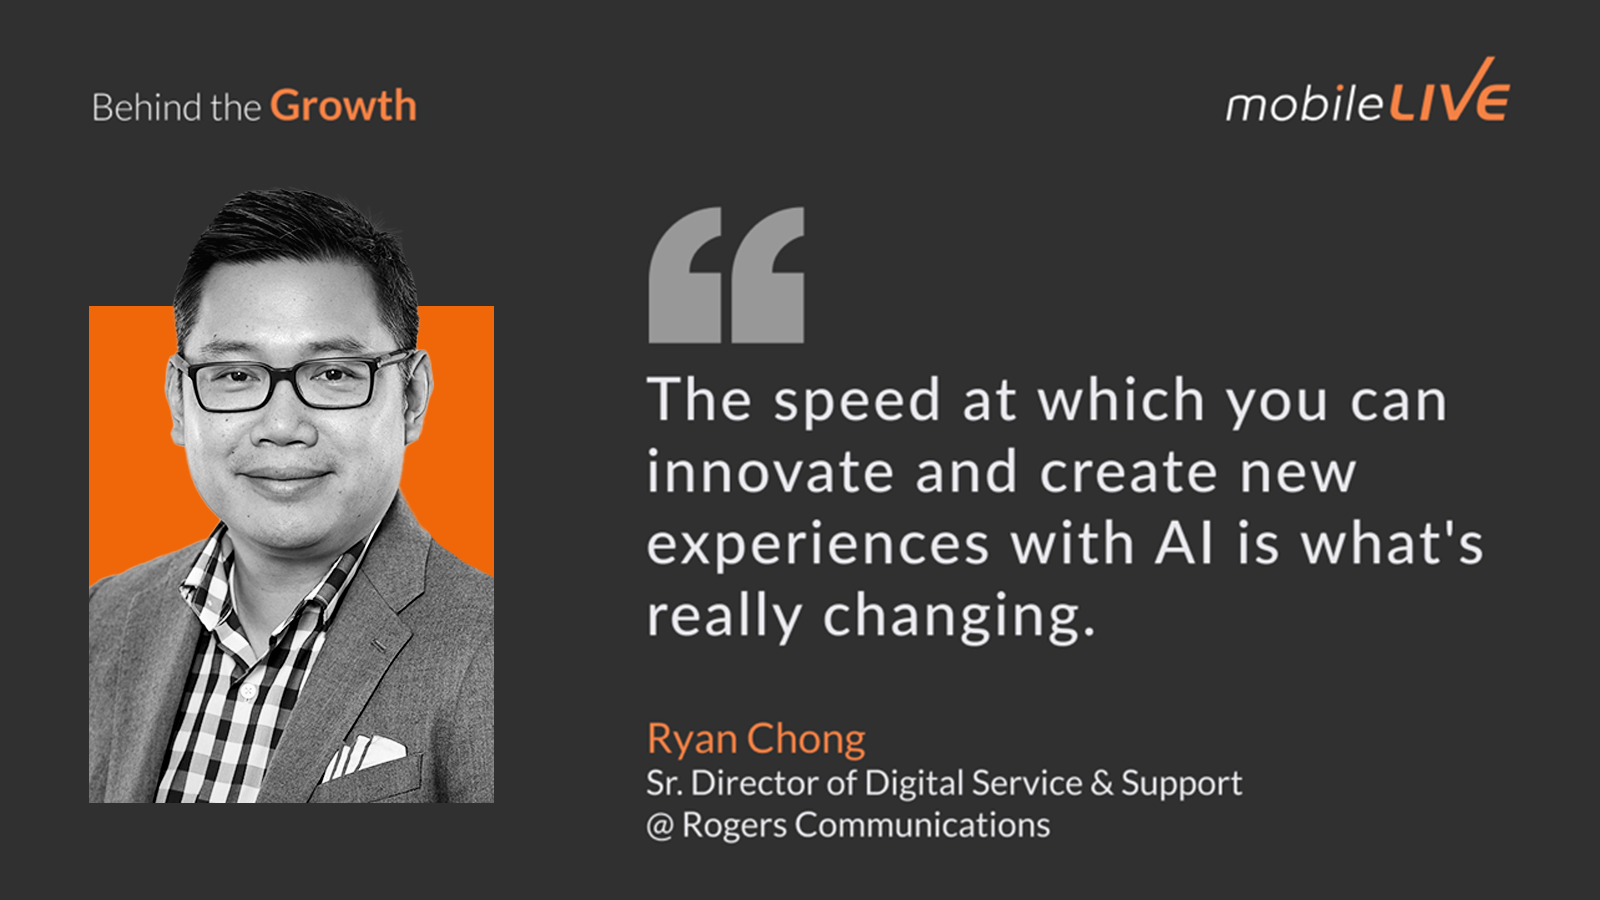 The speed at which you can innovate and create new experiences with AI is what's really changing.